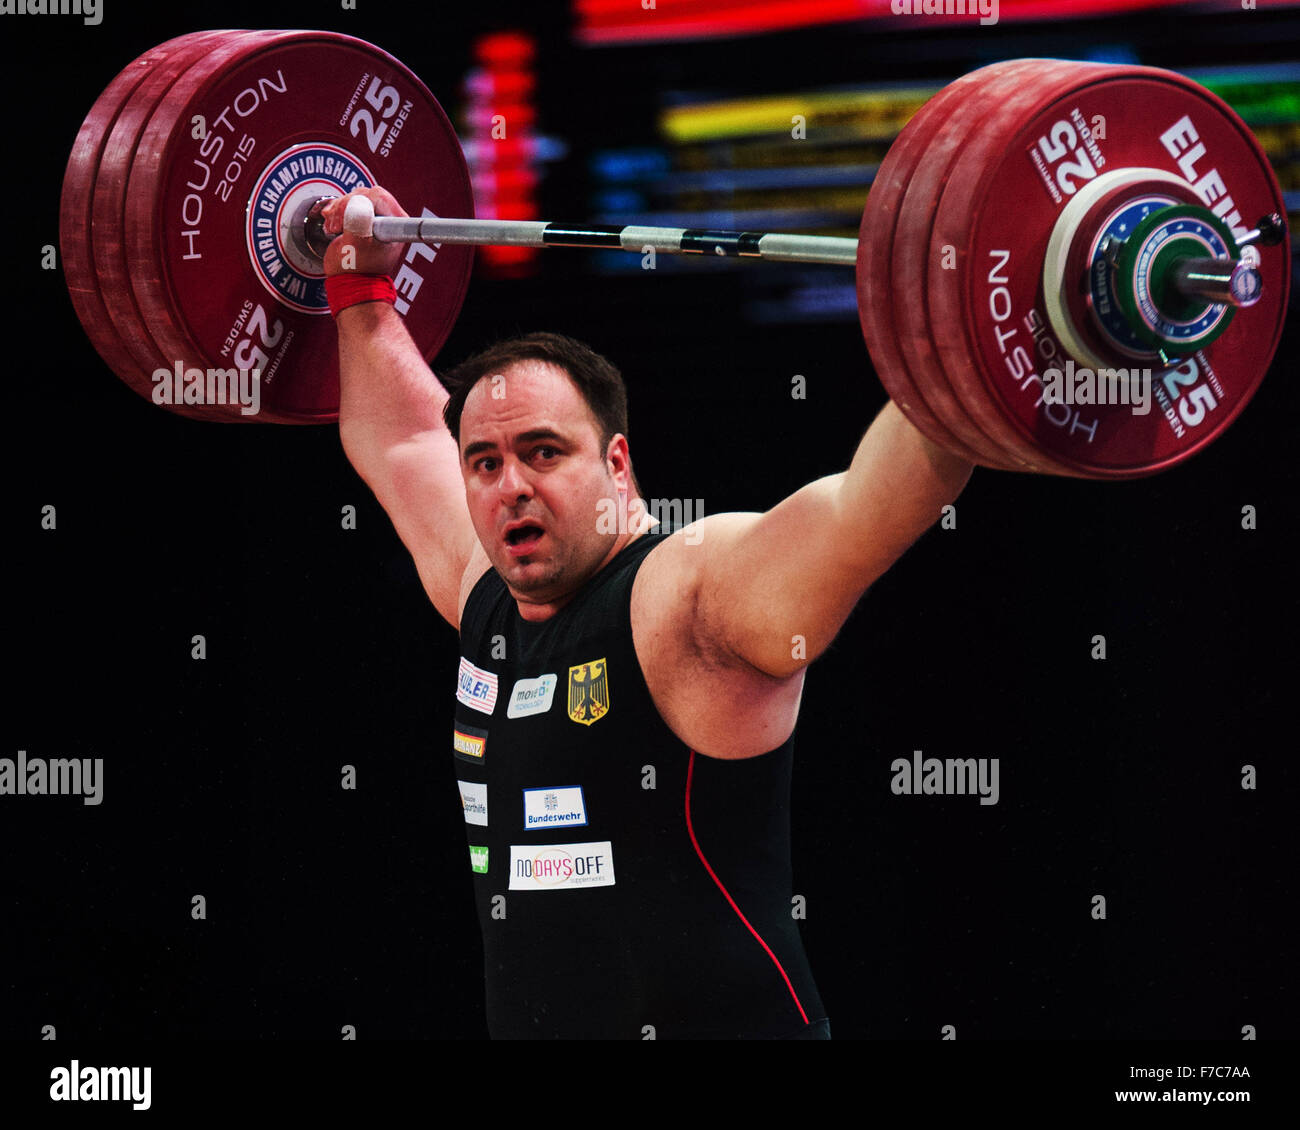 November 26, 2015: Almir Velagic of Germany competes in the snatch in the Men's 105+ Class at the World Weightlfting Championships in Houston, Texas. Brent Clark/Alamy Live News Stock Photo